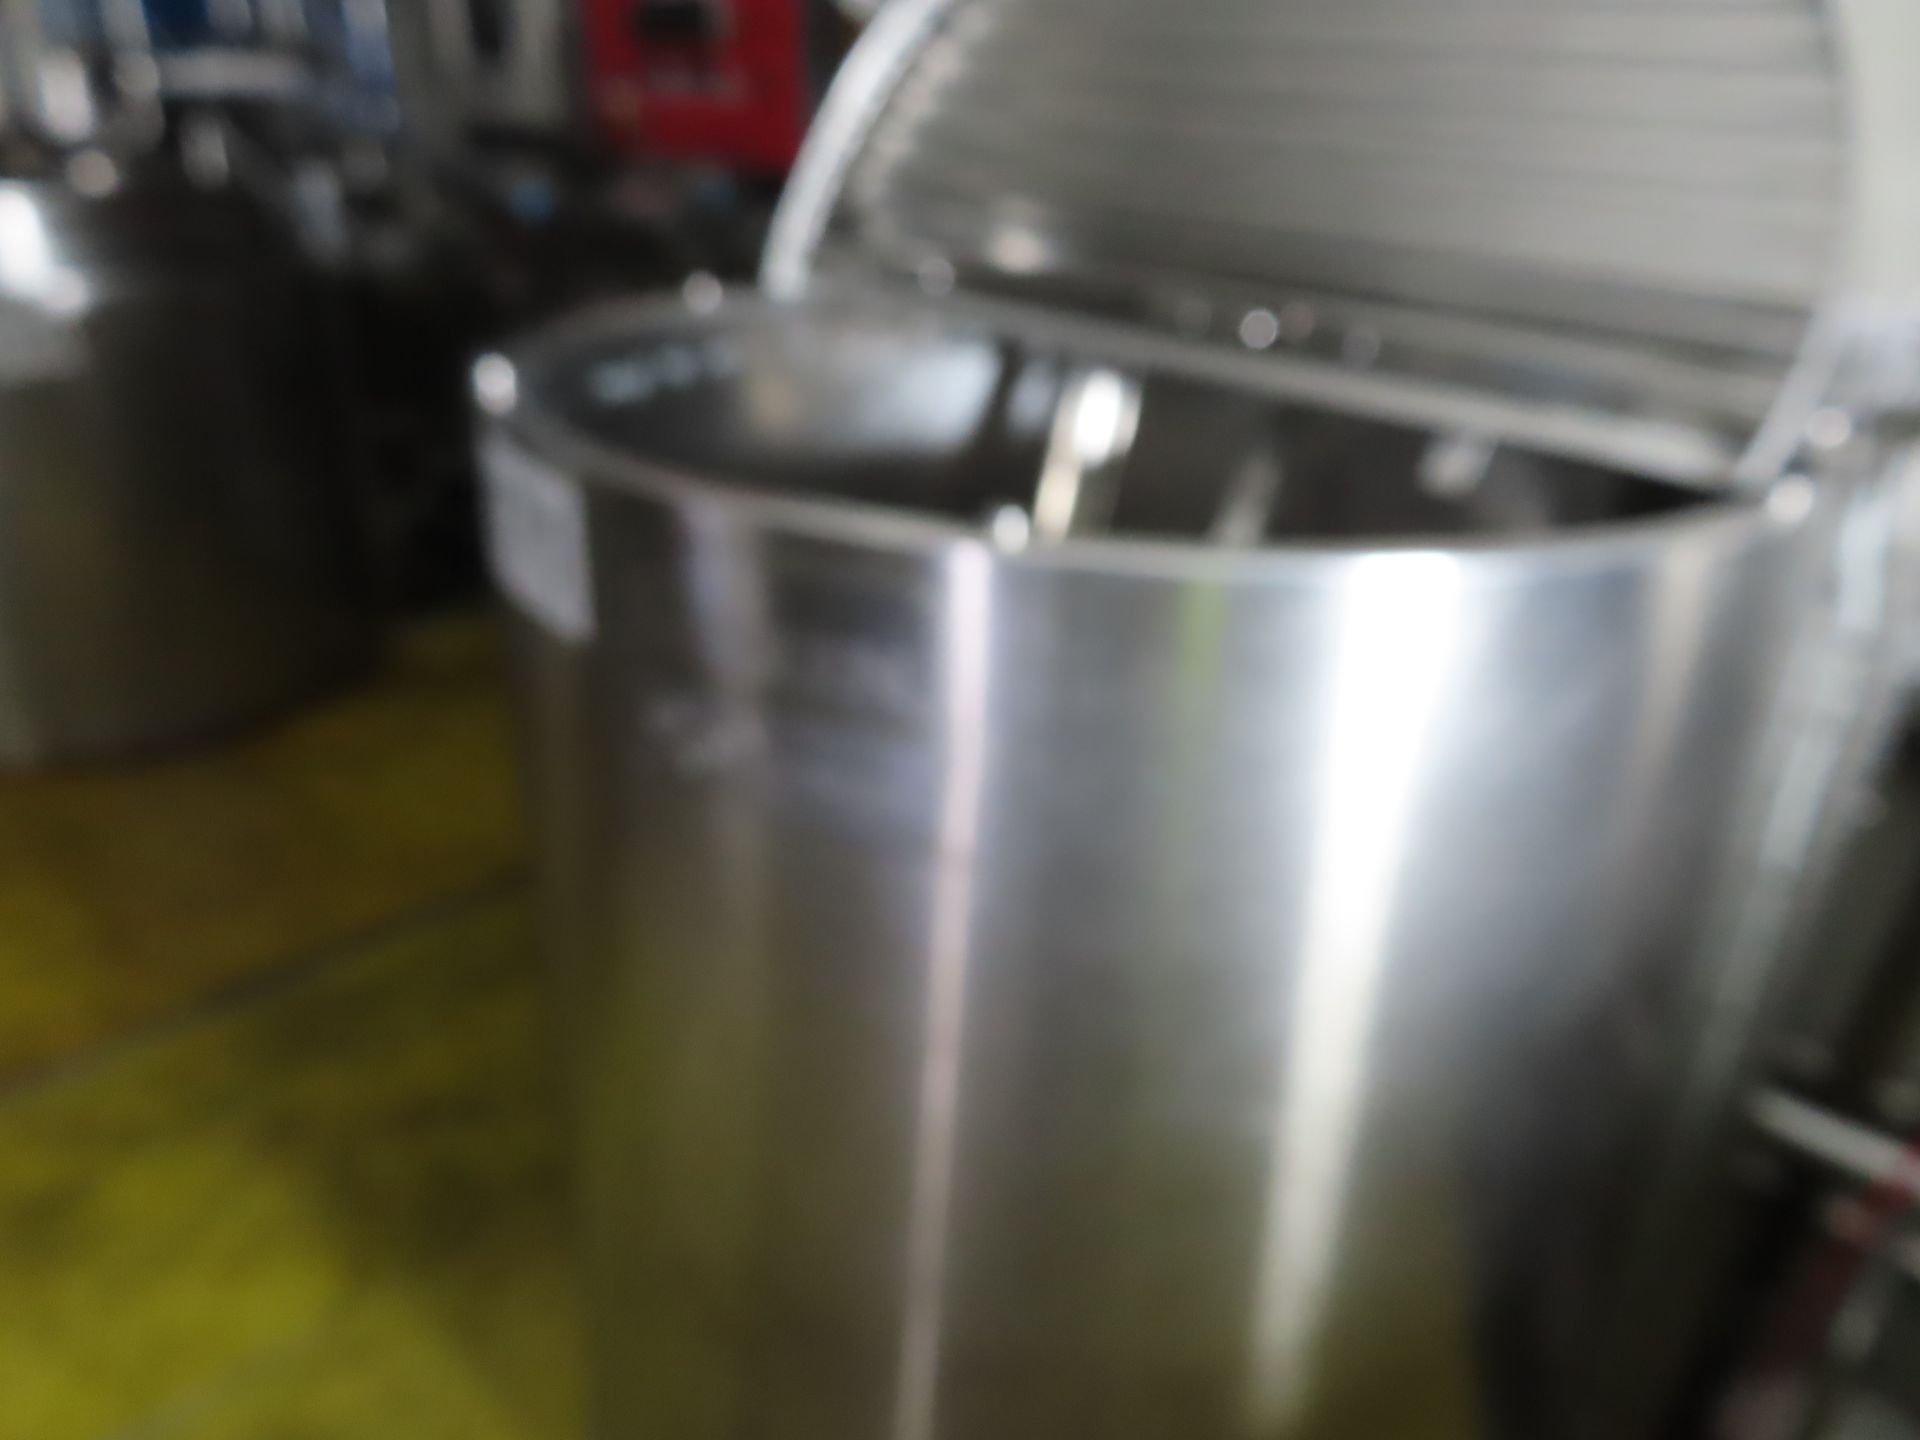 DC NORRIS COOKING VESSEL. 500 LITRE CAPACITY> - Image 2 of 5